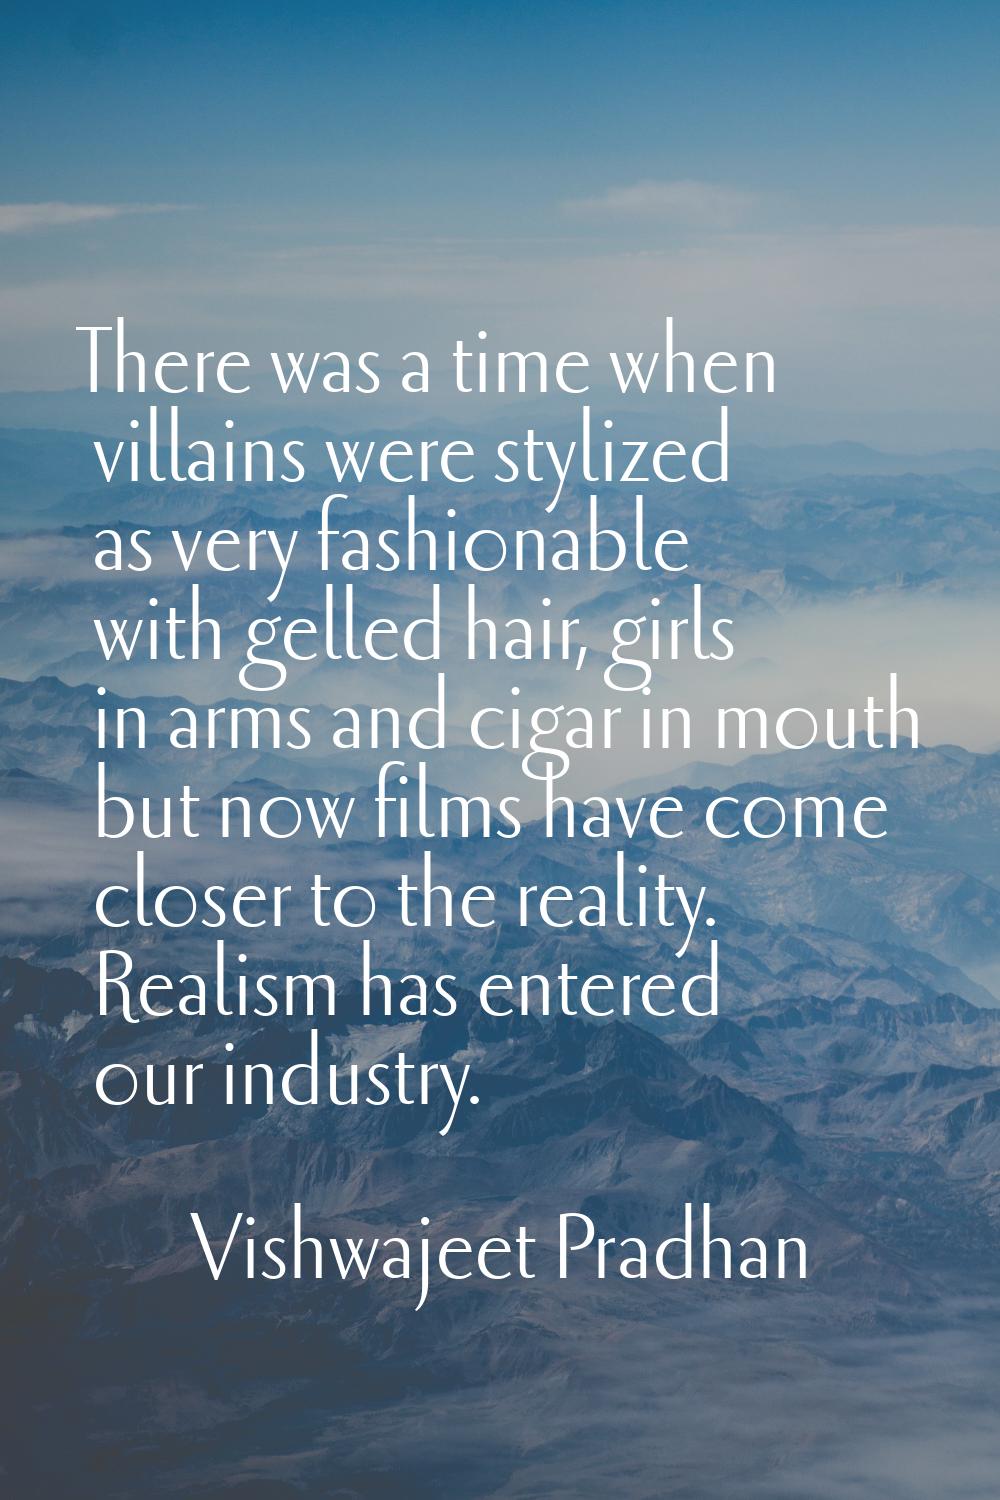 There was a time when villains were stylized as very fashionable with gelled hair, girls in arms an